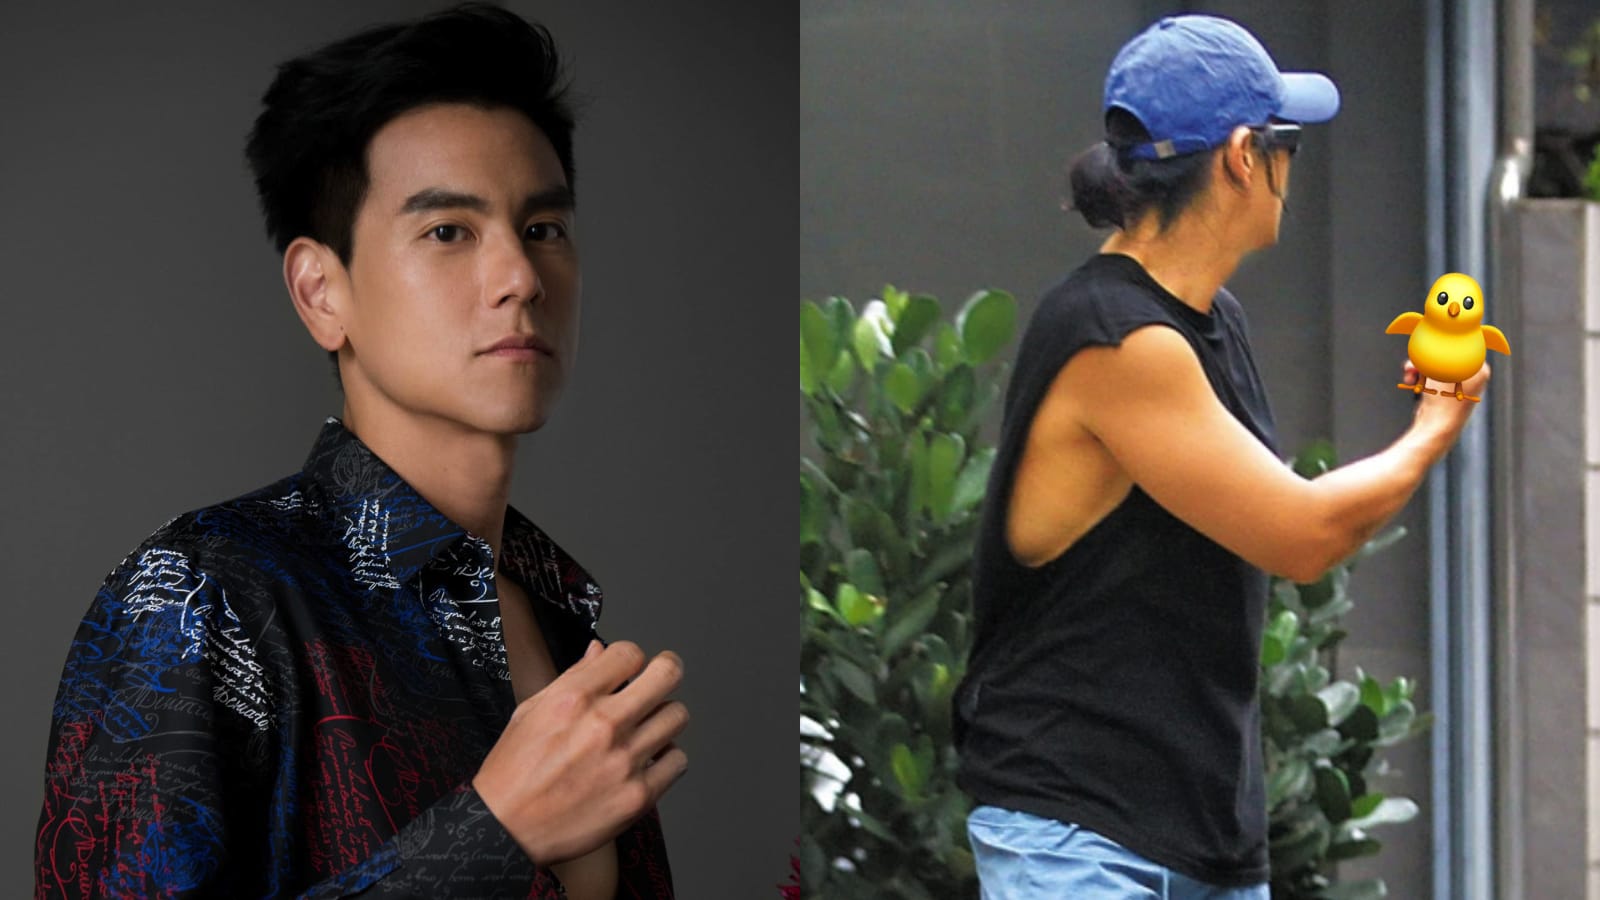 What Made Eddie Peng Give Someone The Middle Finger In Public?